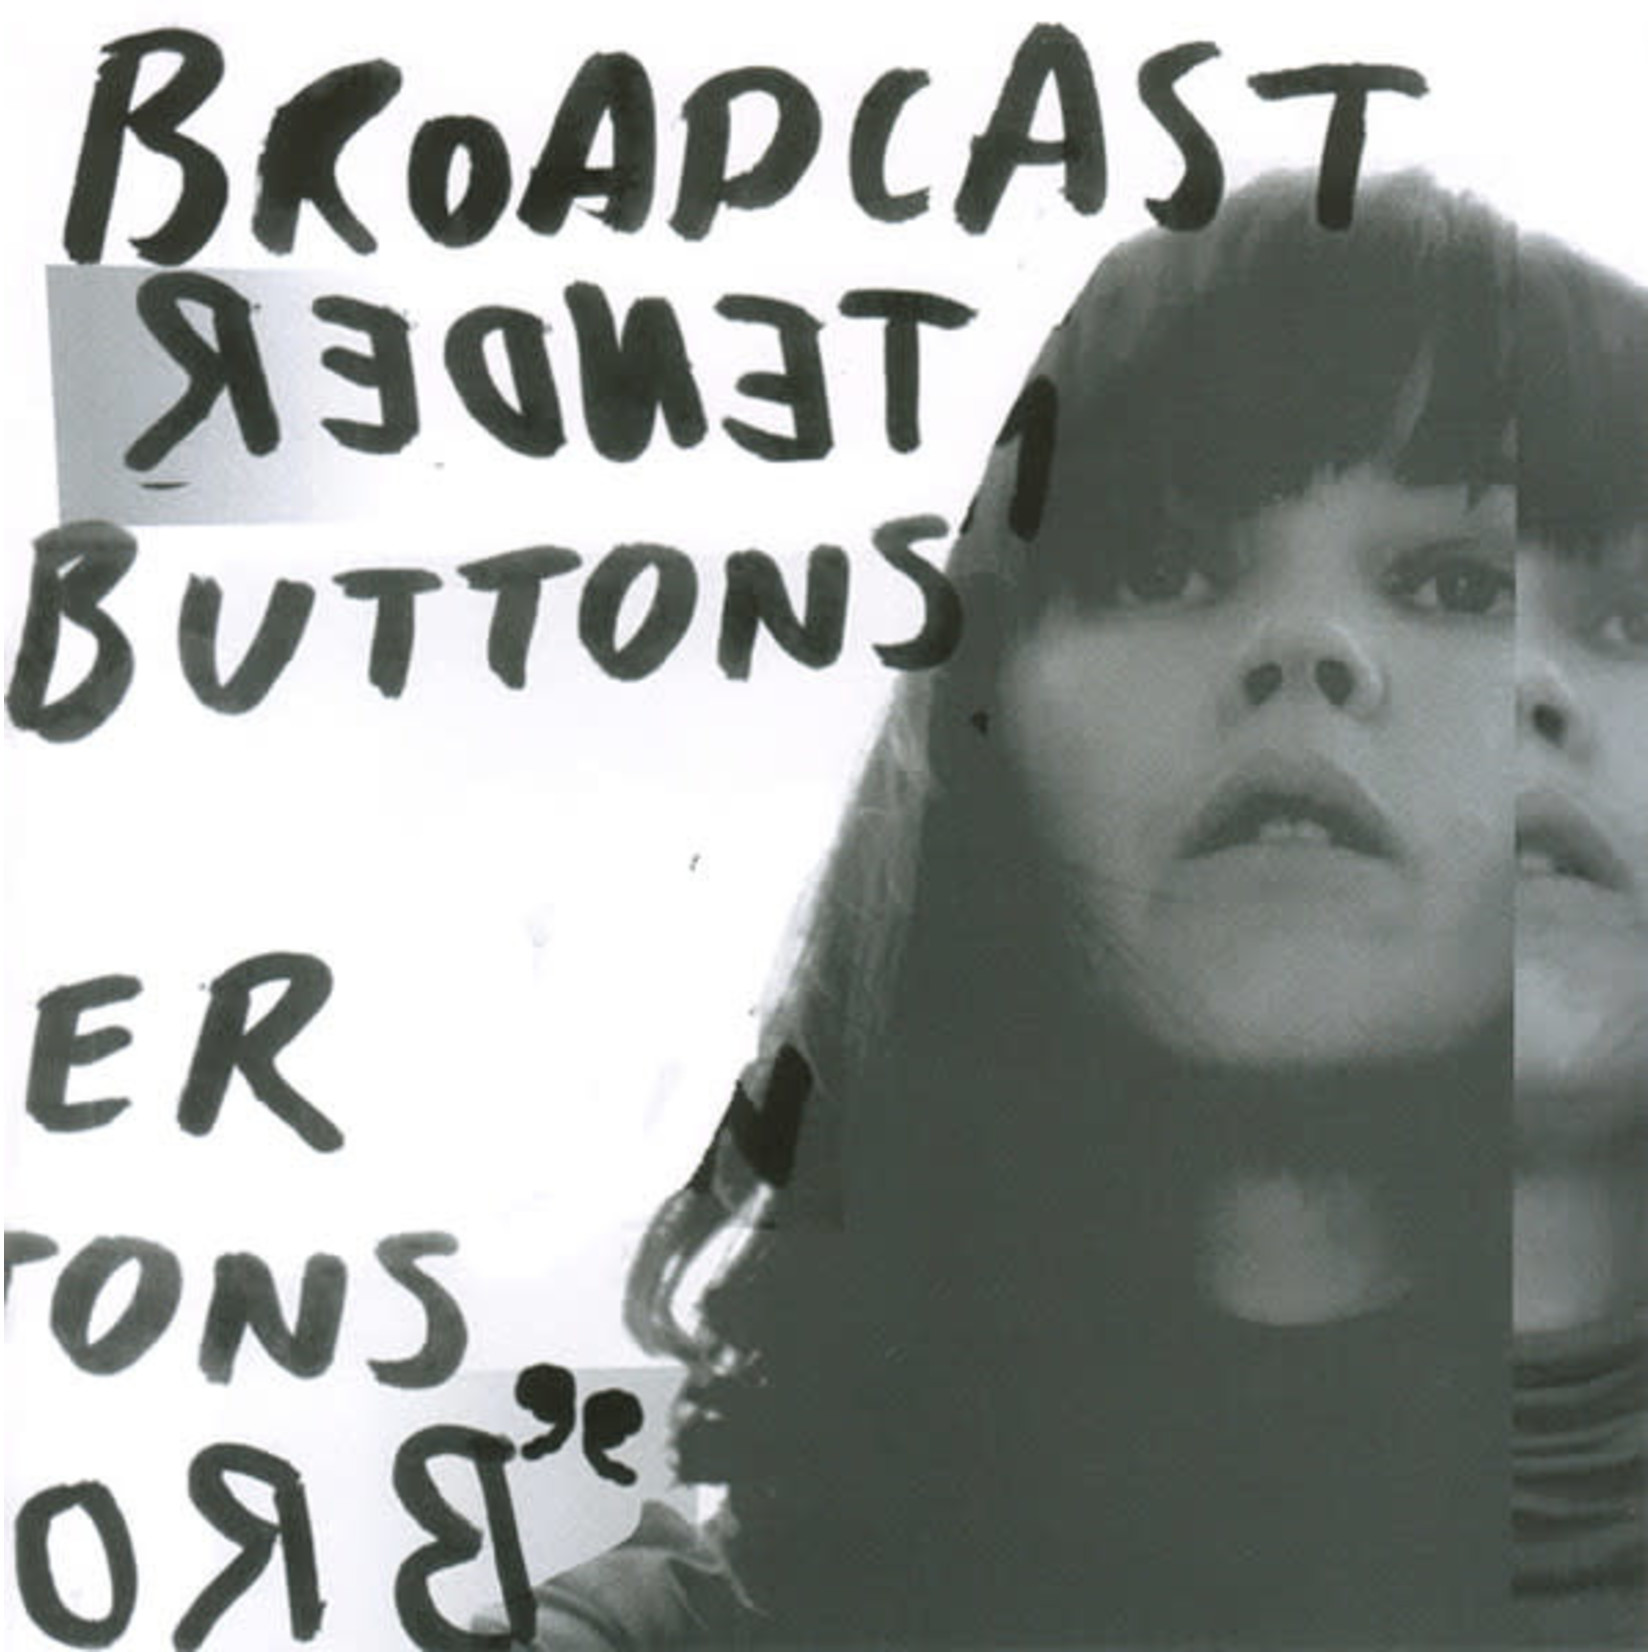 [New] Broadcast - Tender Buttons